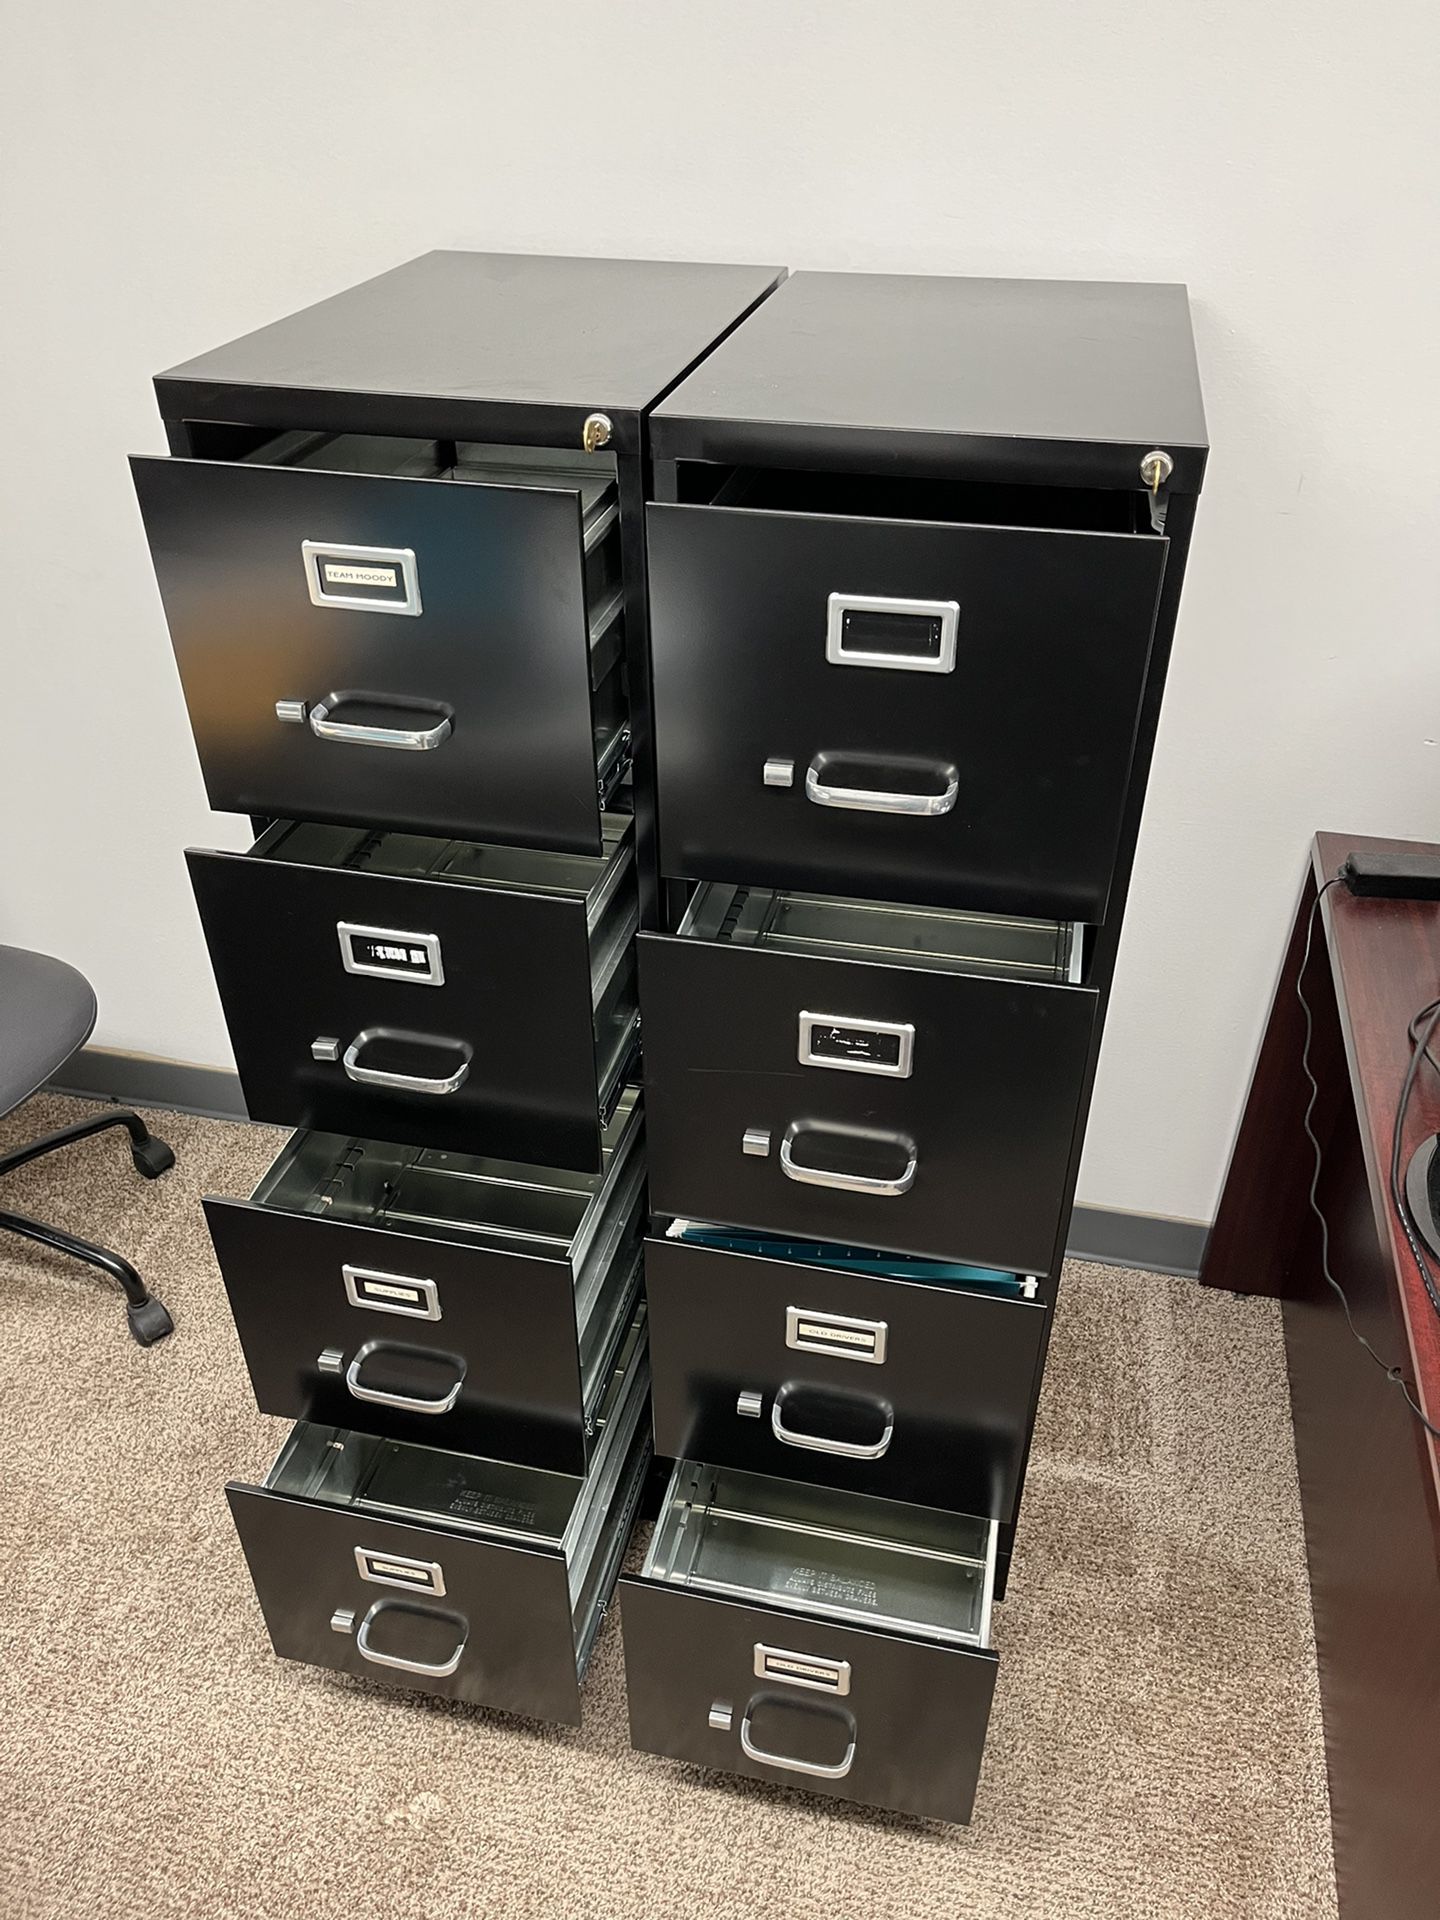 4 Drawer Vertical File Cabinets With Keys